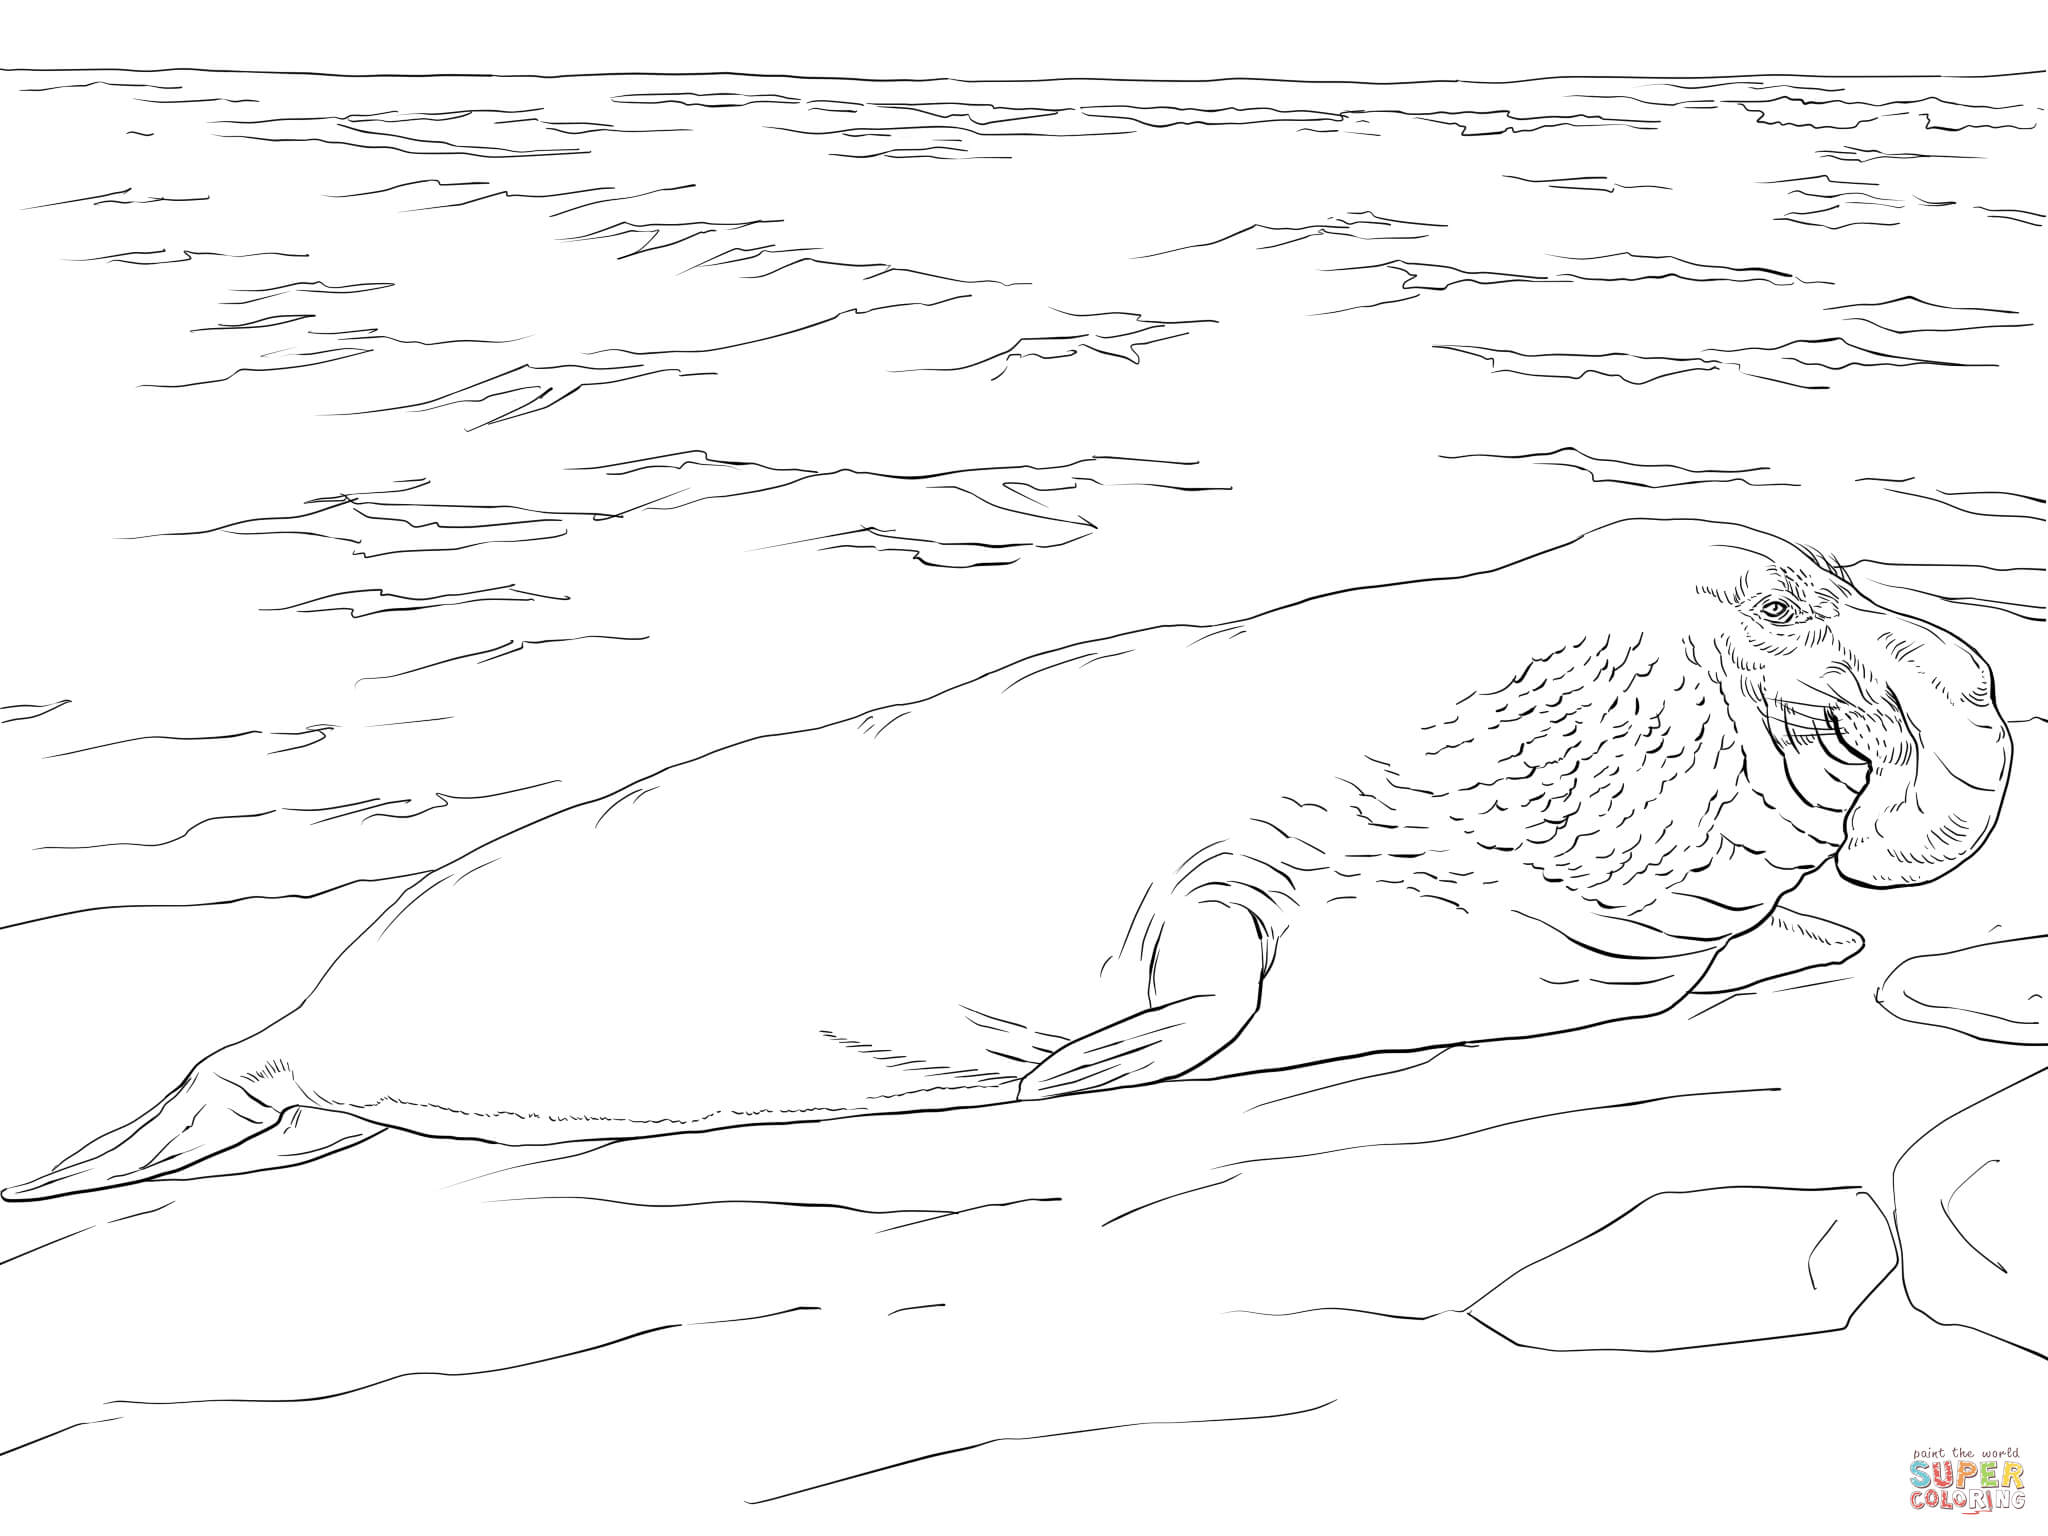 Elephant Seal on the Shore coloring page | Free Printable Coloring ...